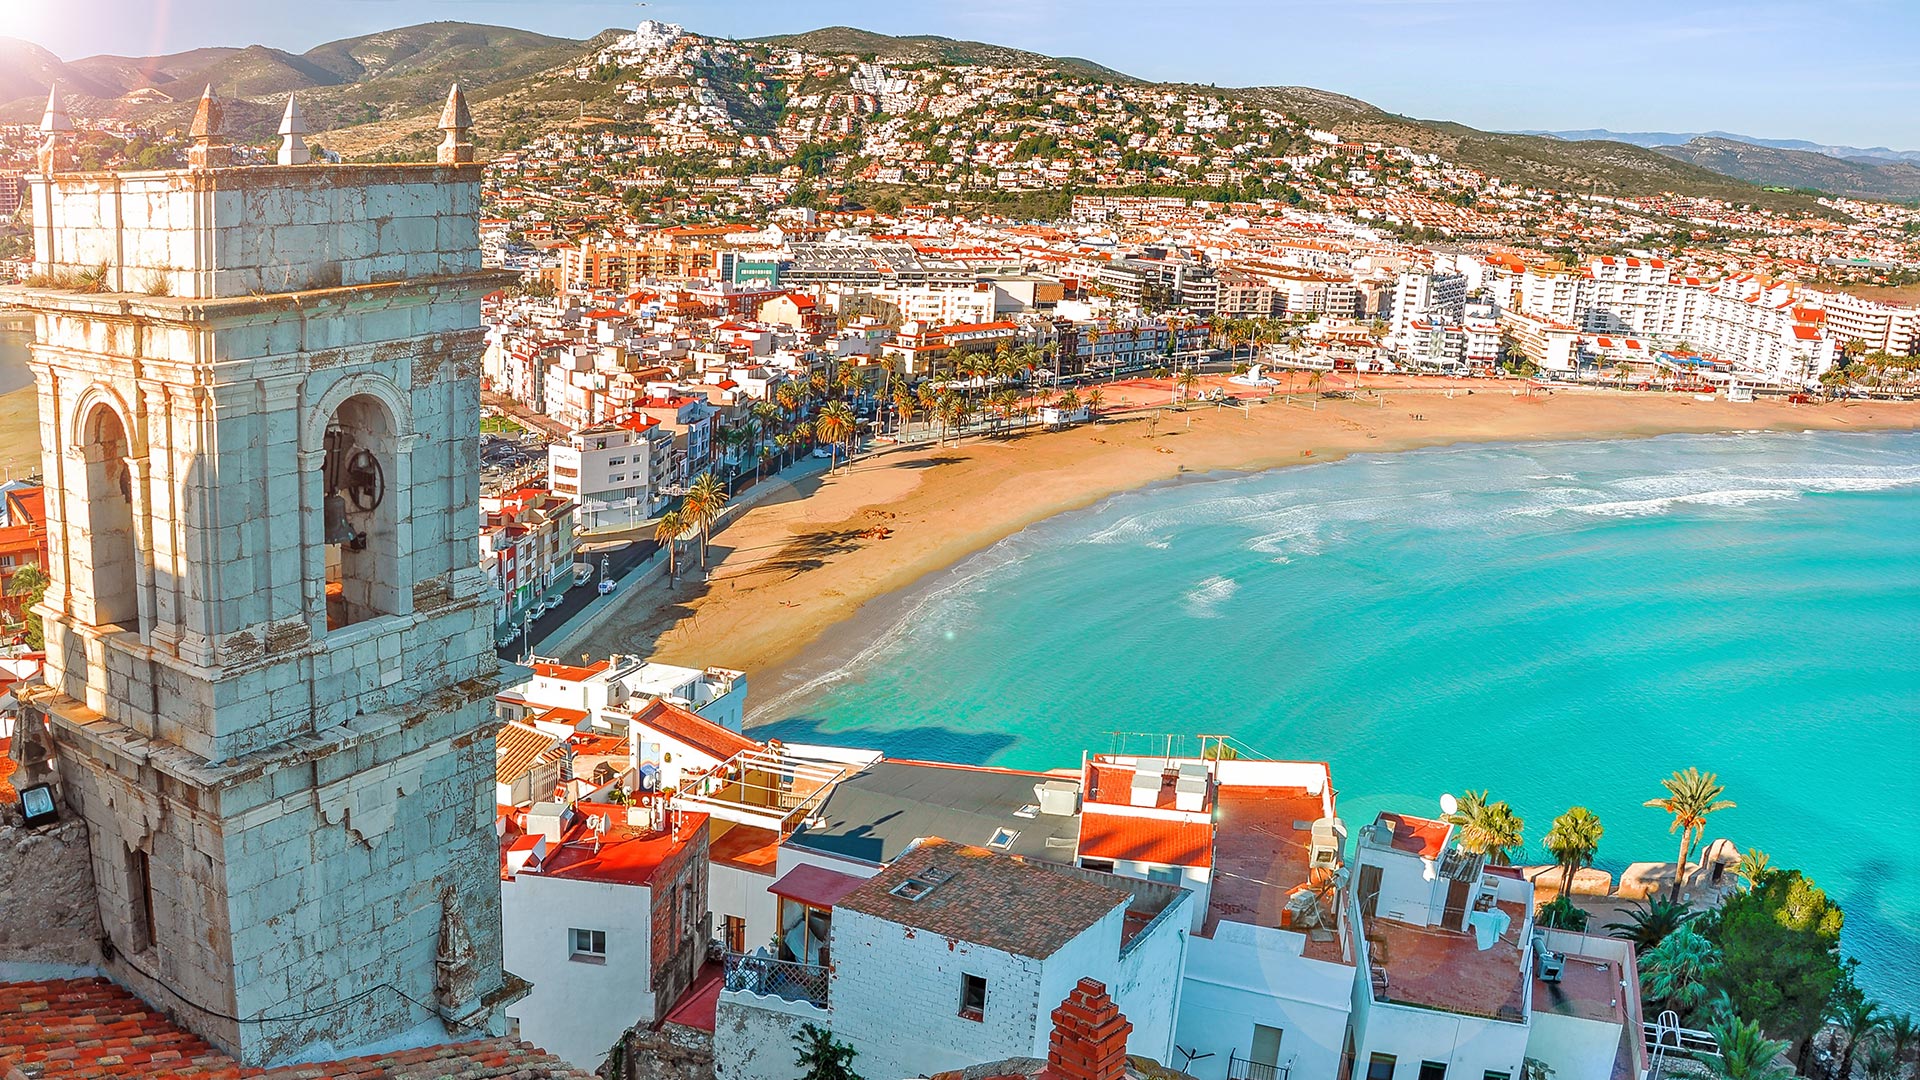 Stunning beaches, Disney-style attractions and €2 pizzas – the Spanish city with three holidays in one